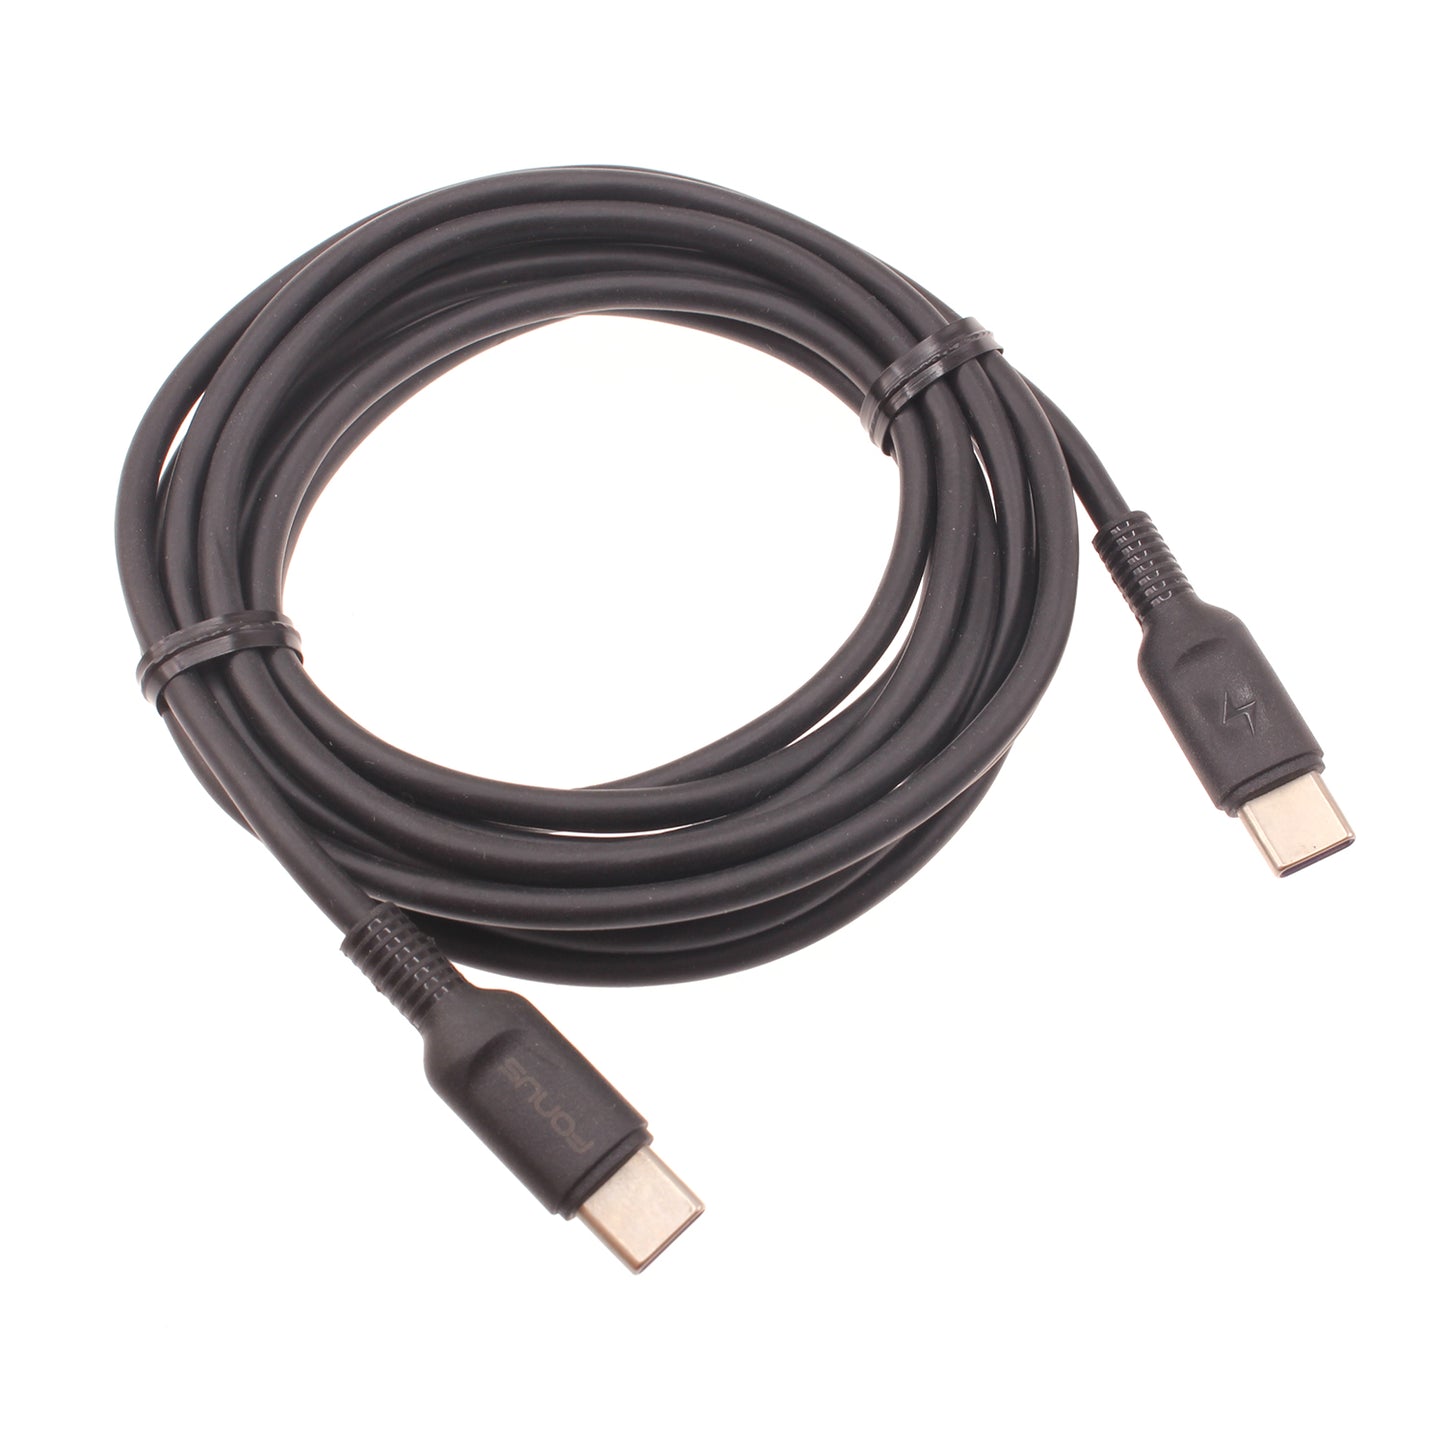 PD Type-C Cable 6ft USB-C Charger Cord Fast Long Power - ONJ68